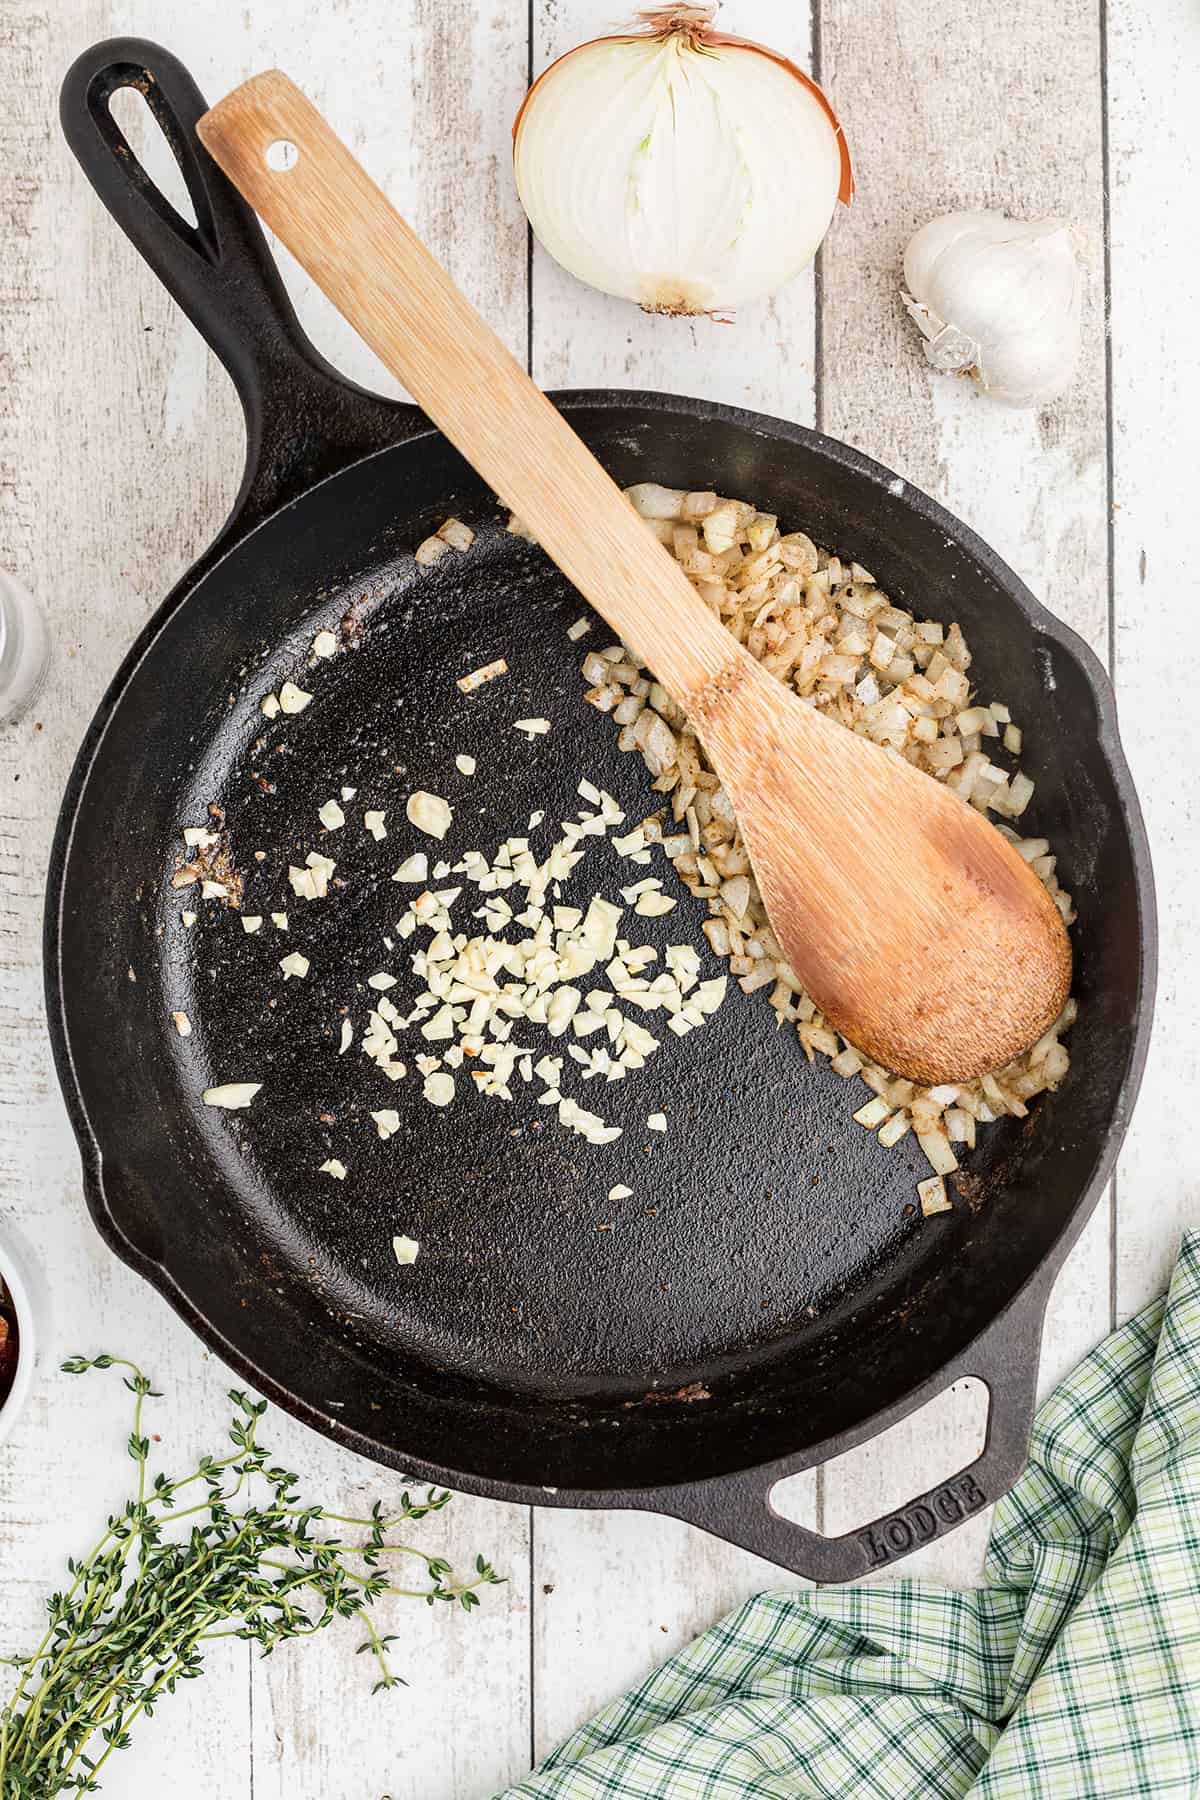 Onion and garlic cooking in a skillet.